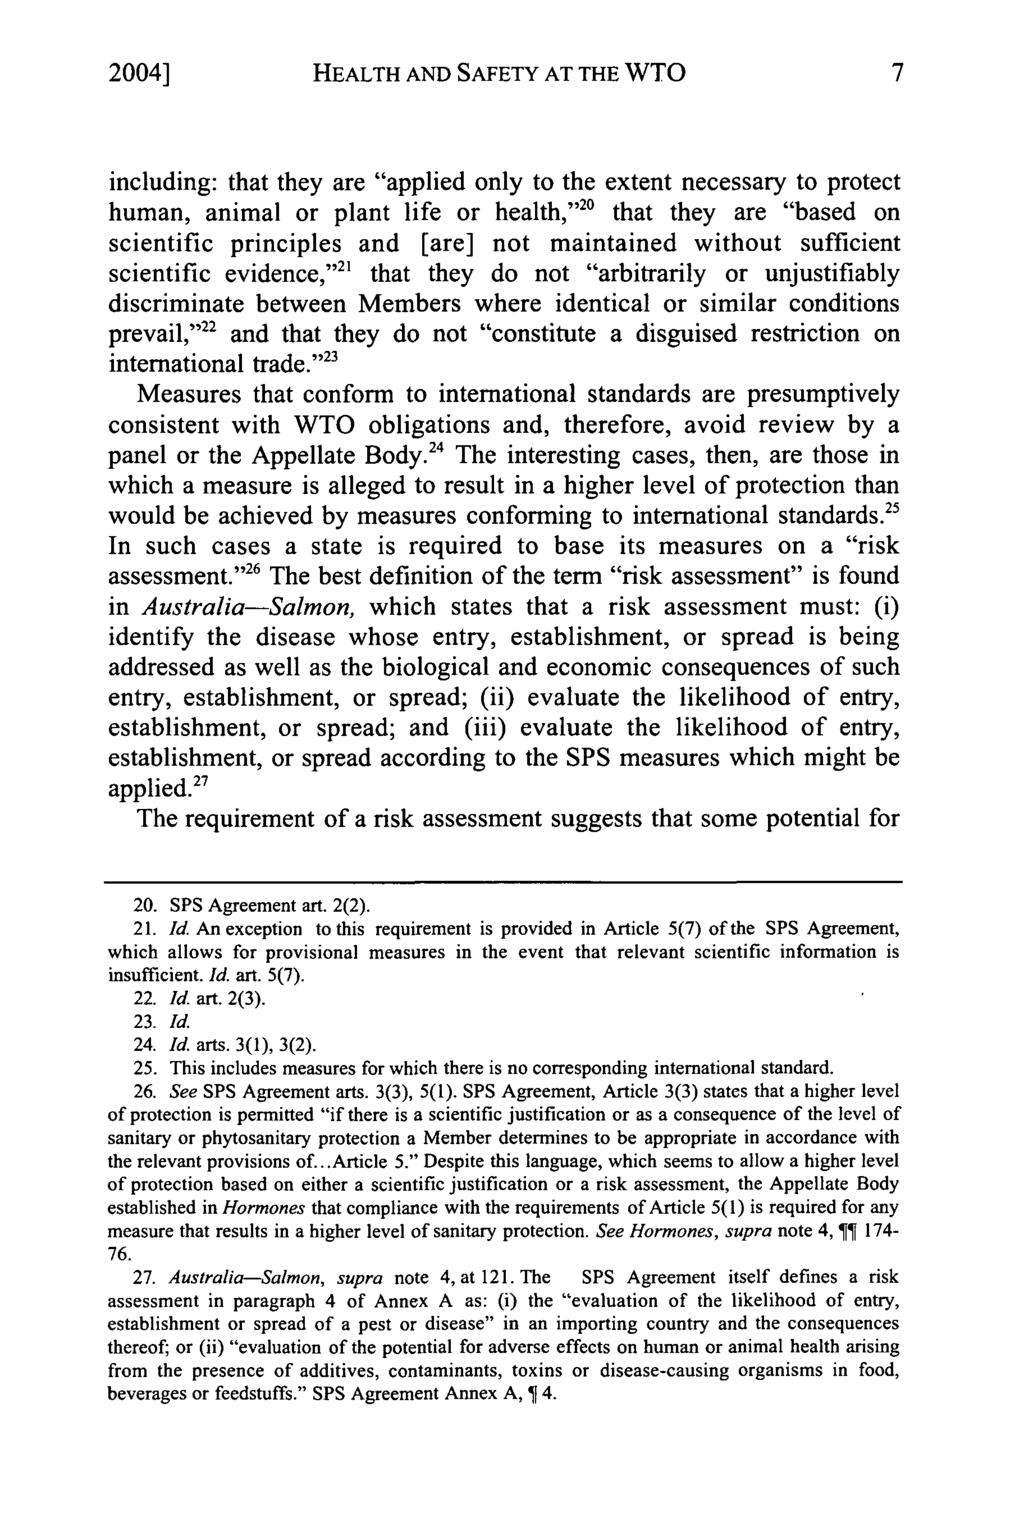 2004] HEALTH AND SAFETY AT THE WTO including: that they are "applied only to the extent necessary to protect human, animal or plant life or health," 2 that they are "based on scientific principles